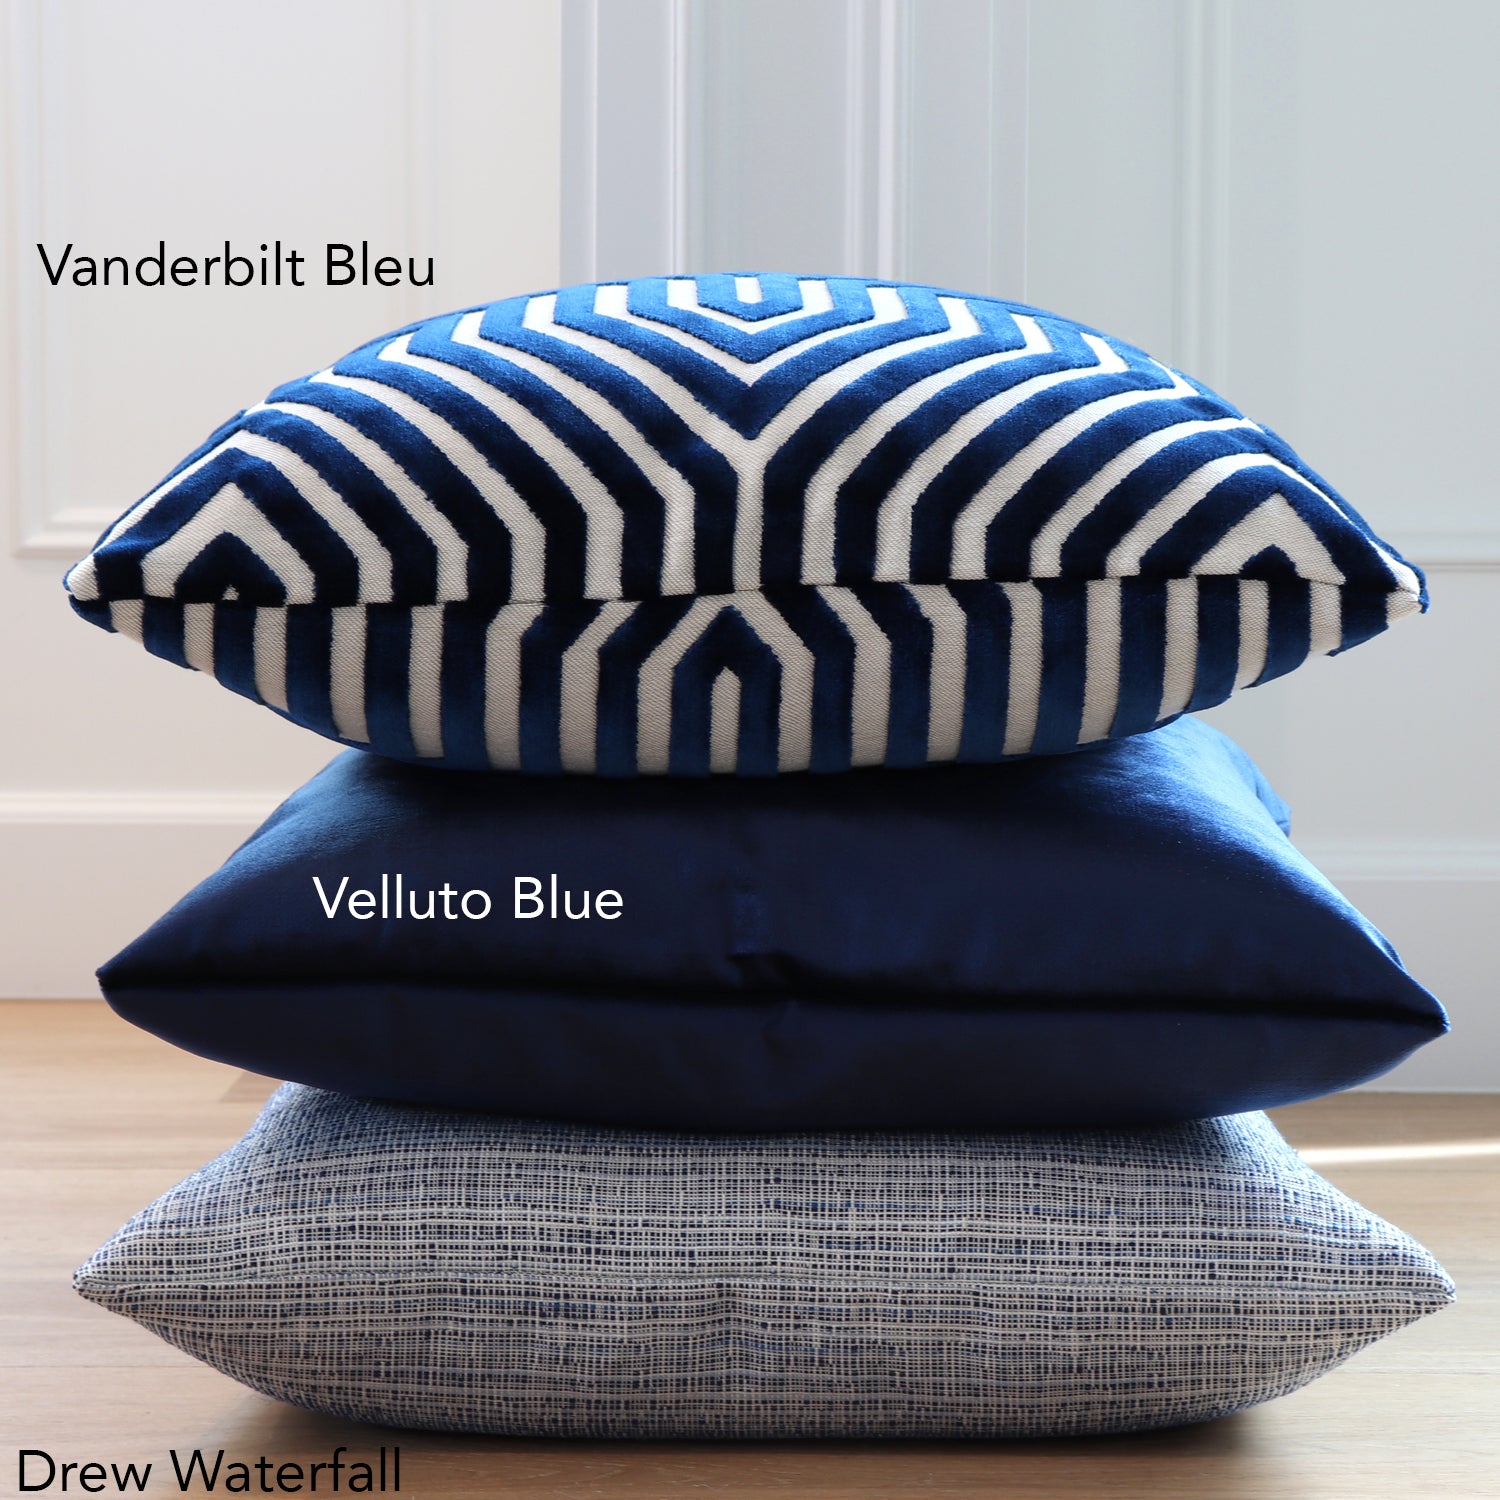 Comvi Navy Blue Throw Pillows with Inserts Included (2 Throw Pillows + 2  Pillow Covers) Decorative Pillows, Inserts & Covers - Velvet Throw Pillows